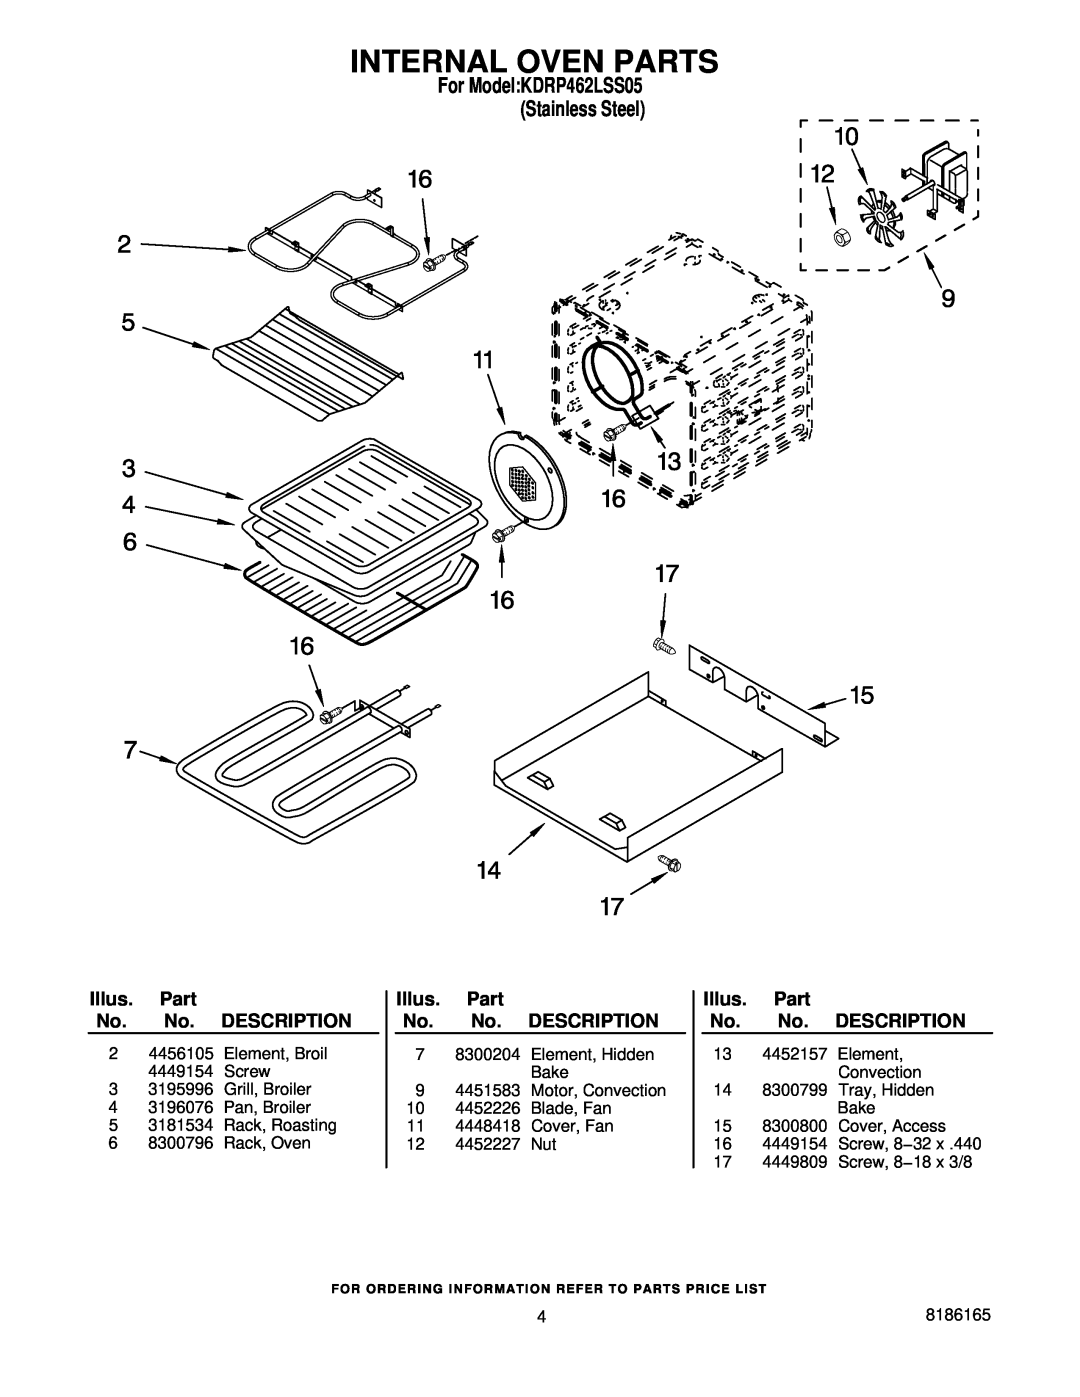 KitchenAid manual Internal Oven Parts, For ModelKDRP462LSS05 Stainless Steel, Illus. Part No. No. DESCRIPTION 